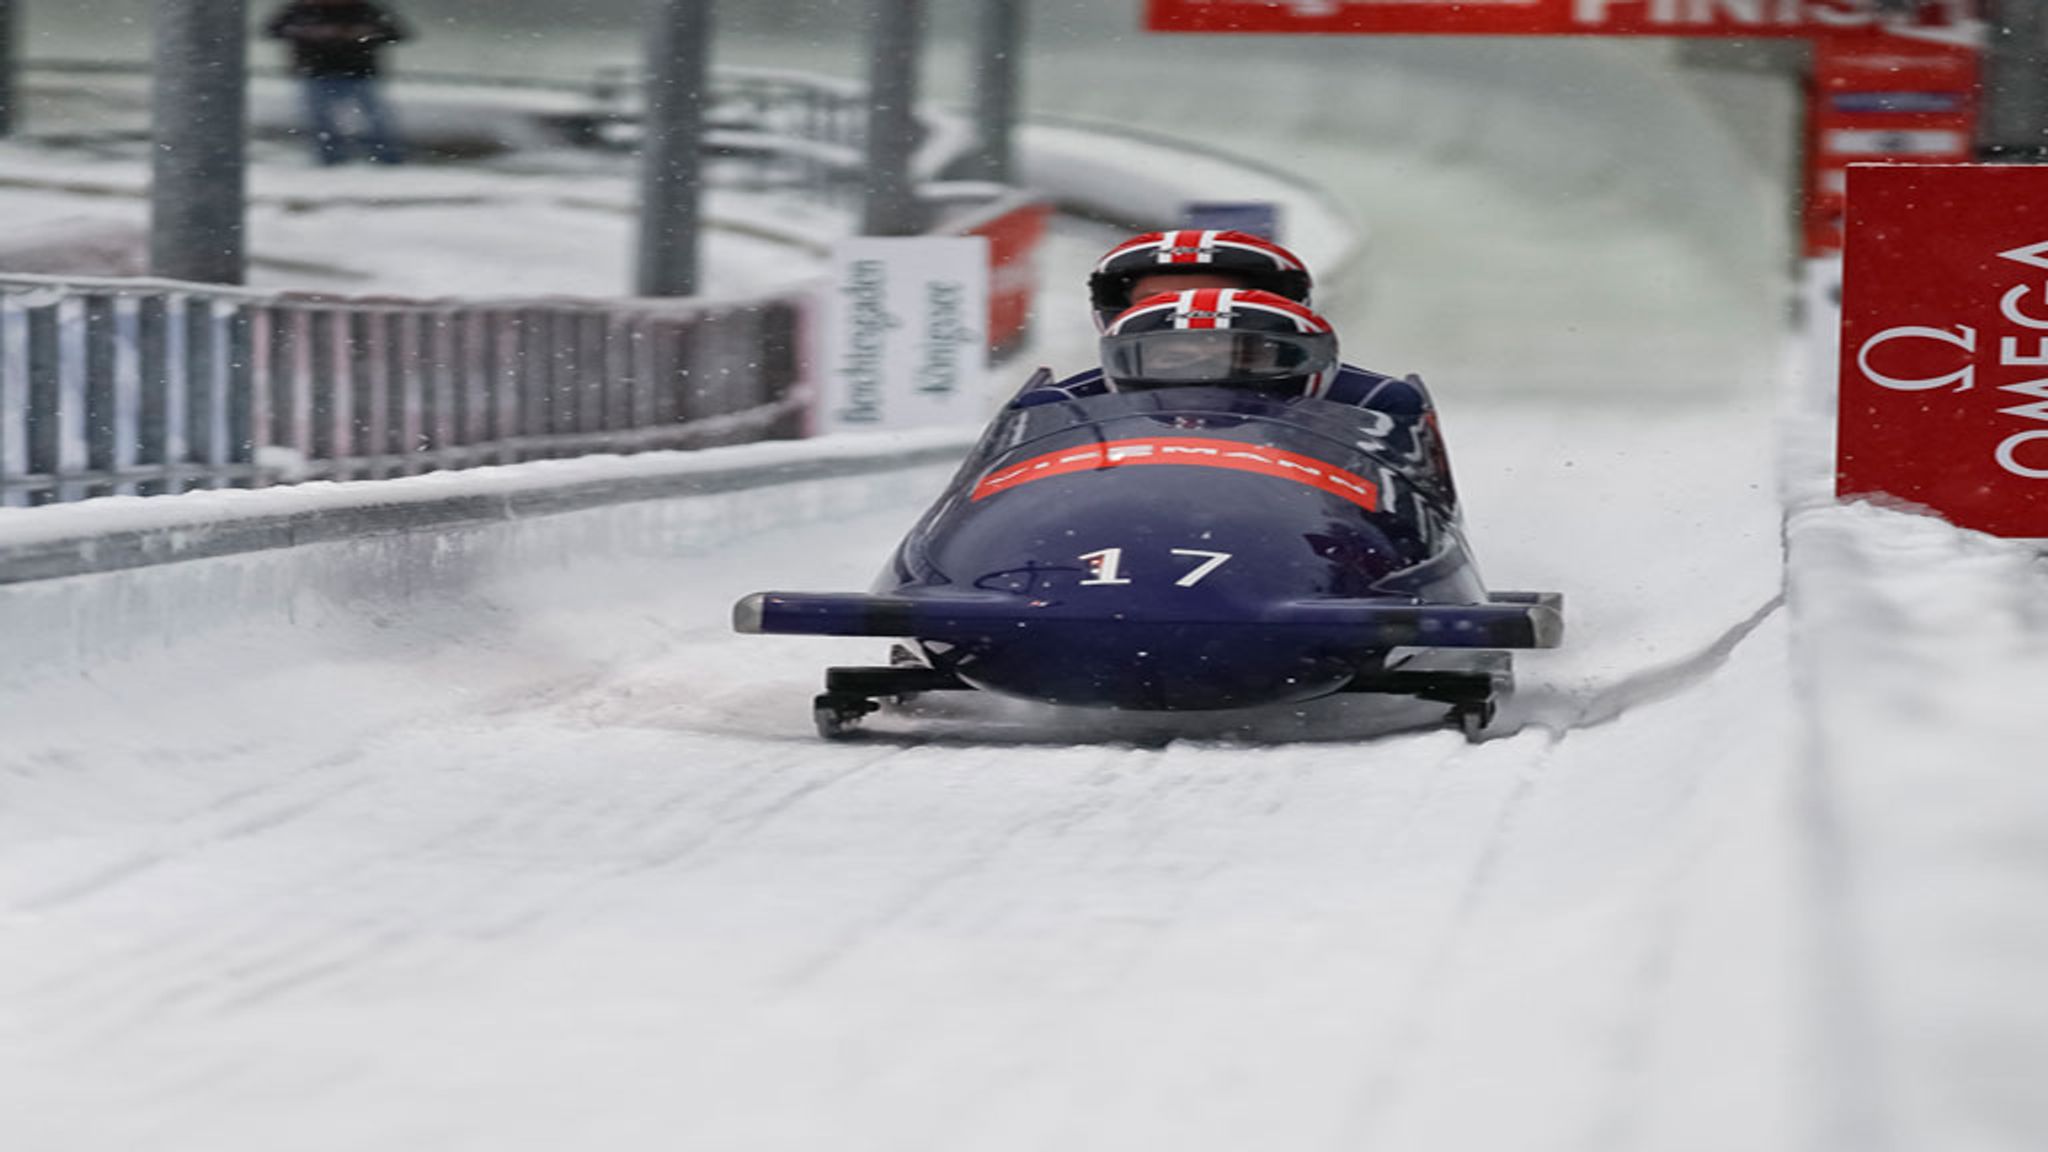 Craig Pickering selected for Bobsleigh World Championships a month after switching sports Olympics News Sky Sports